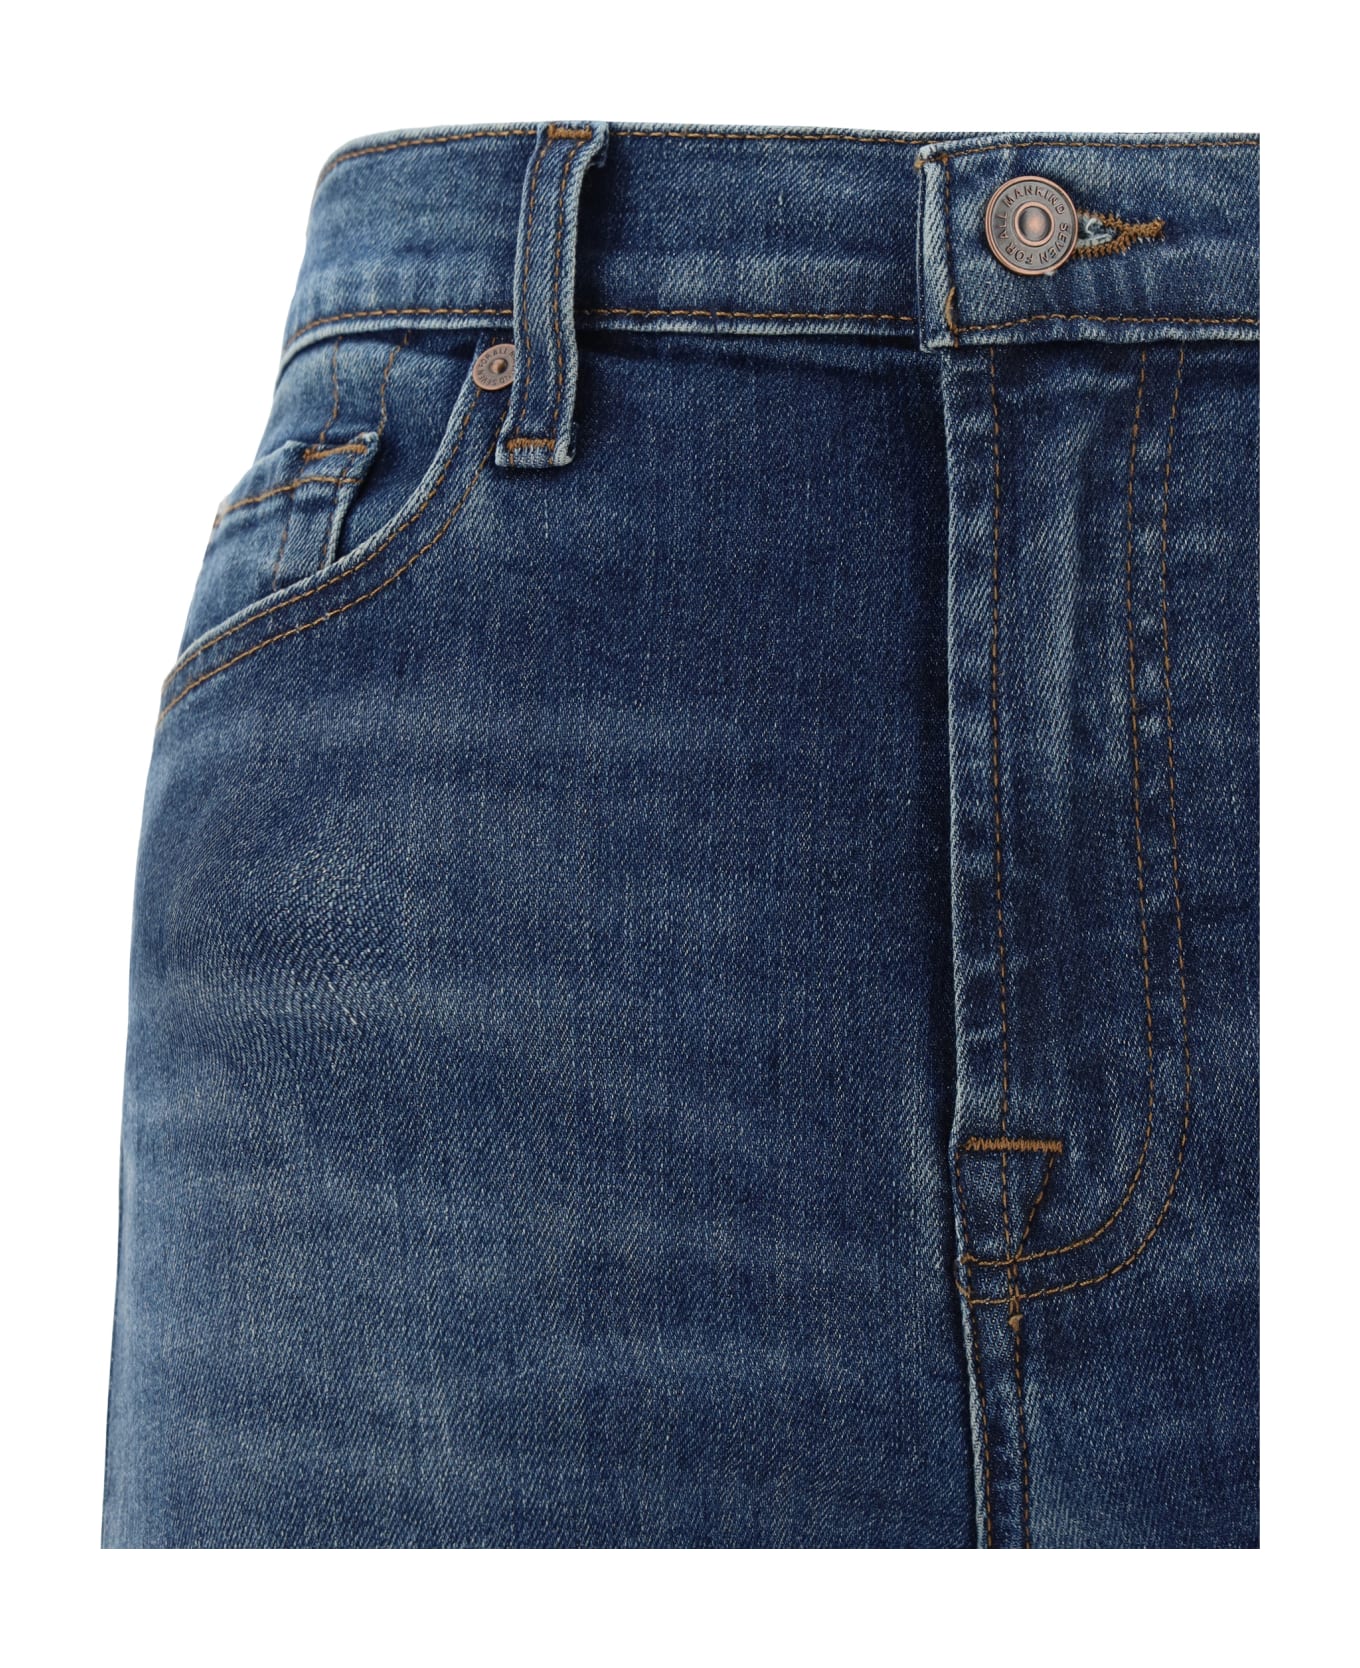 7 For All Mankind Jeans - Blue デニム